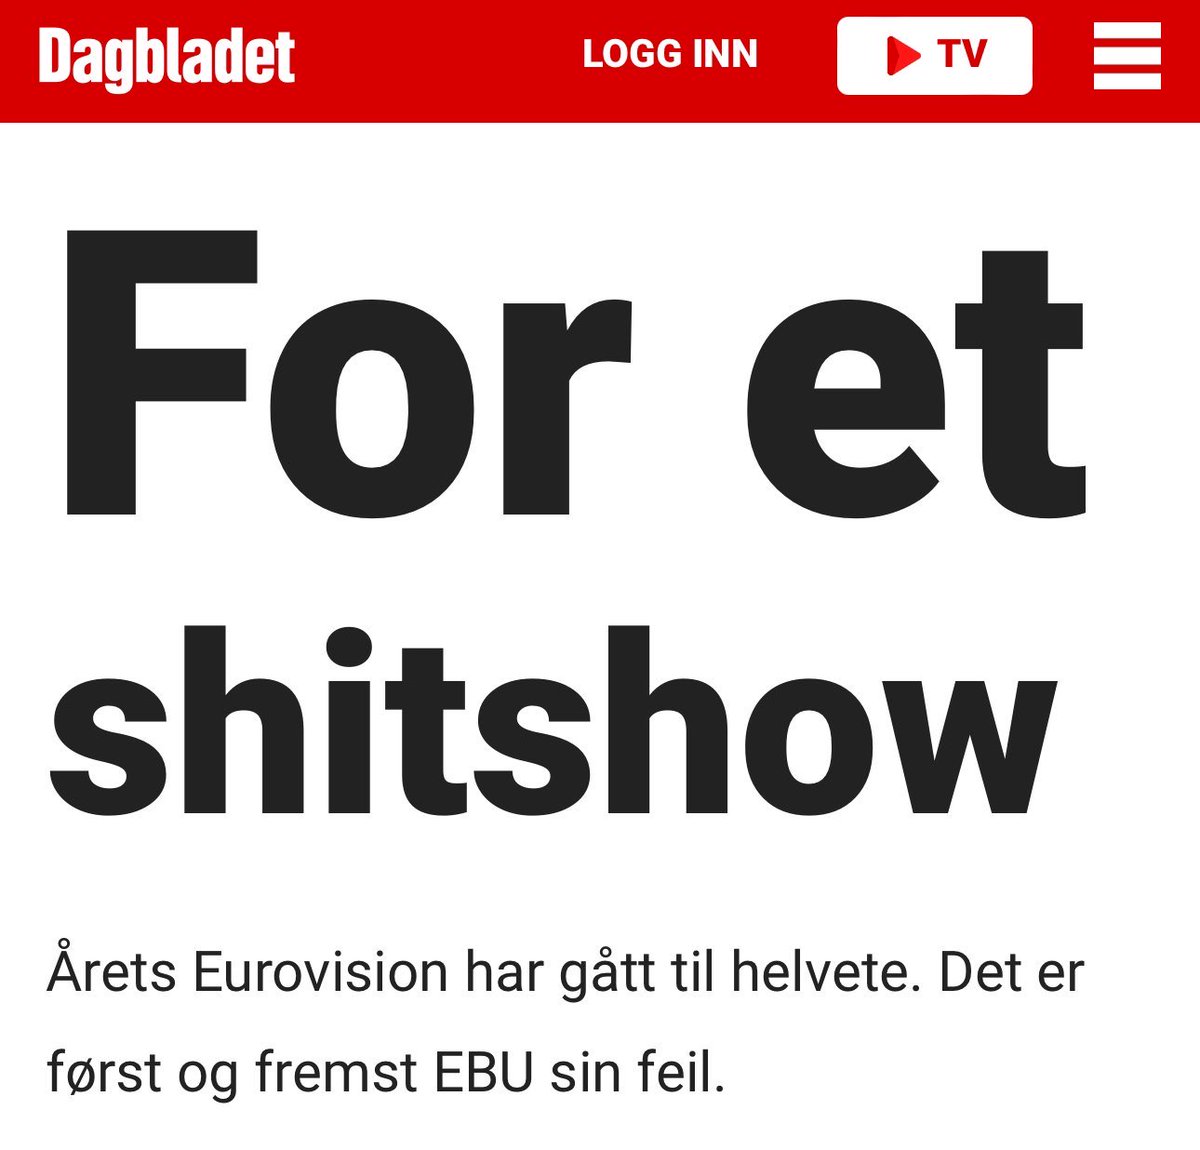 So… Eurovision is going well then